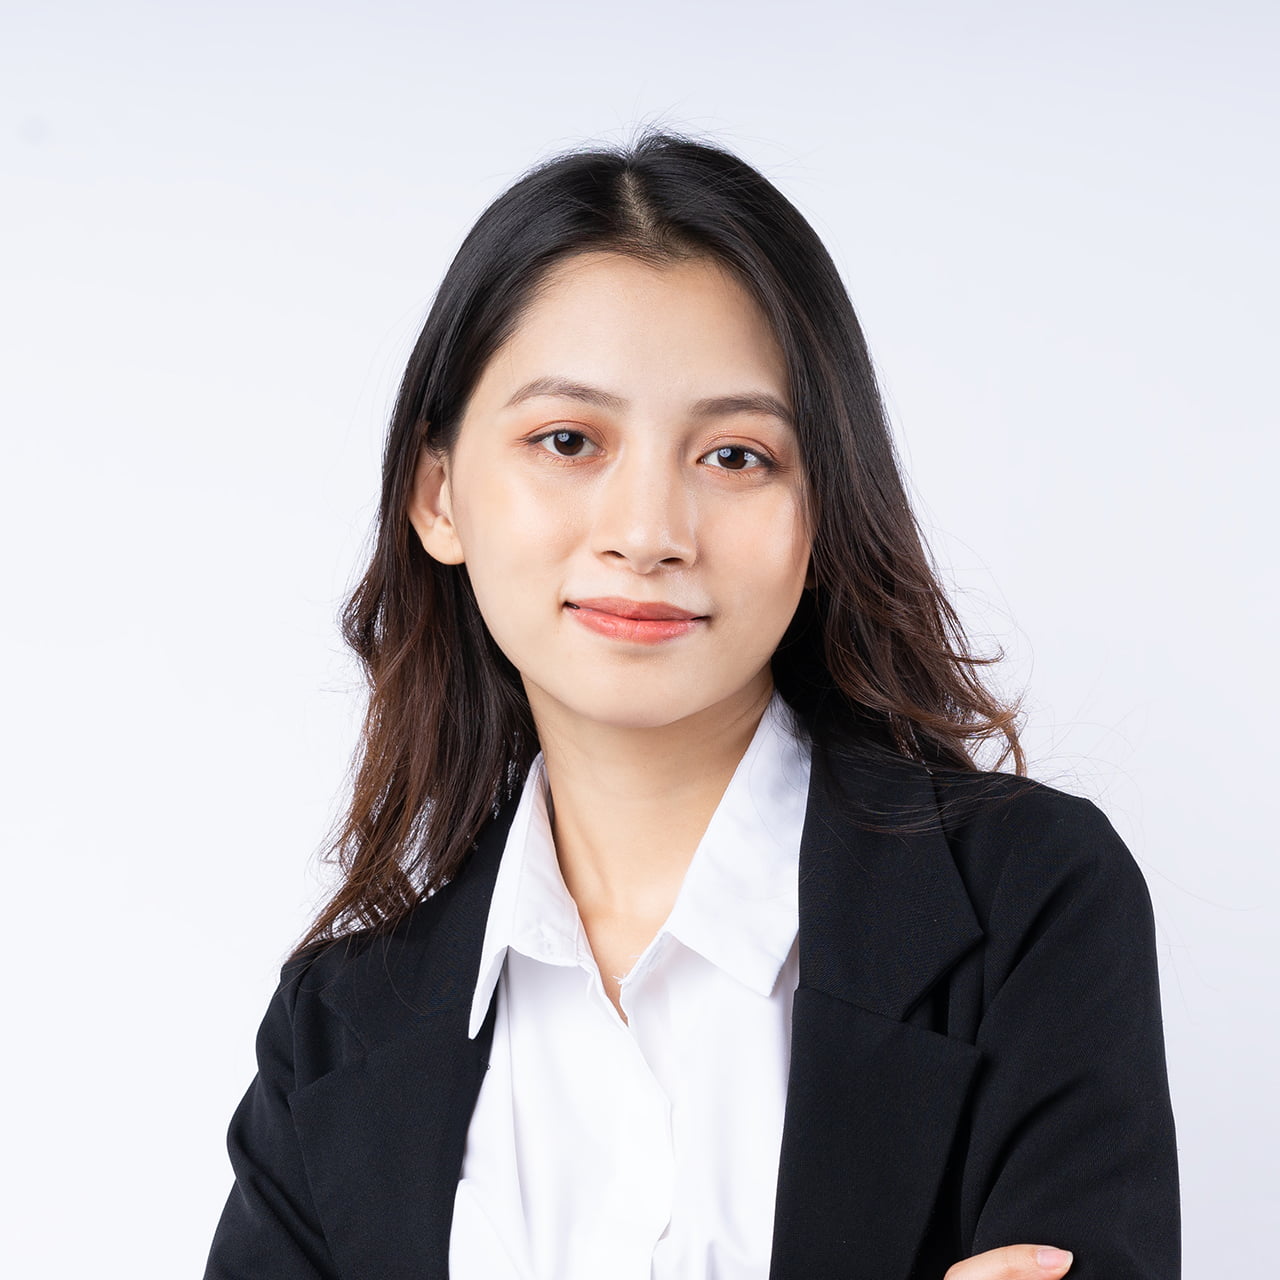 Portrait of young businesswoman wearing a suit, isolated on white background